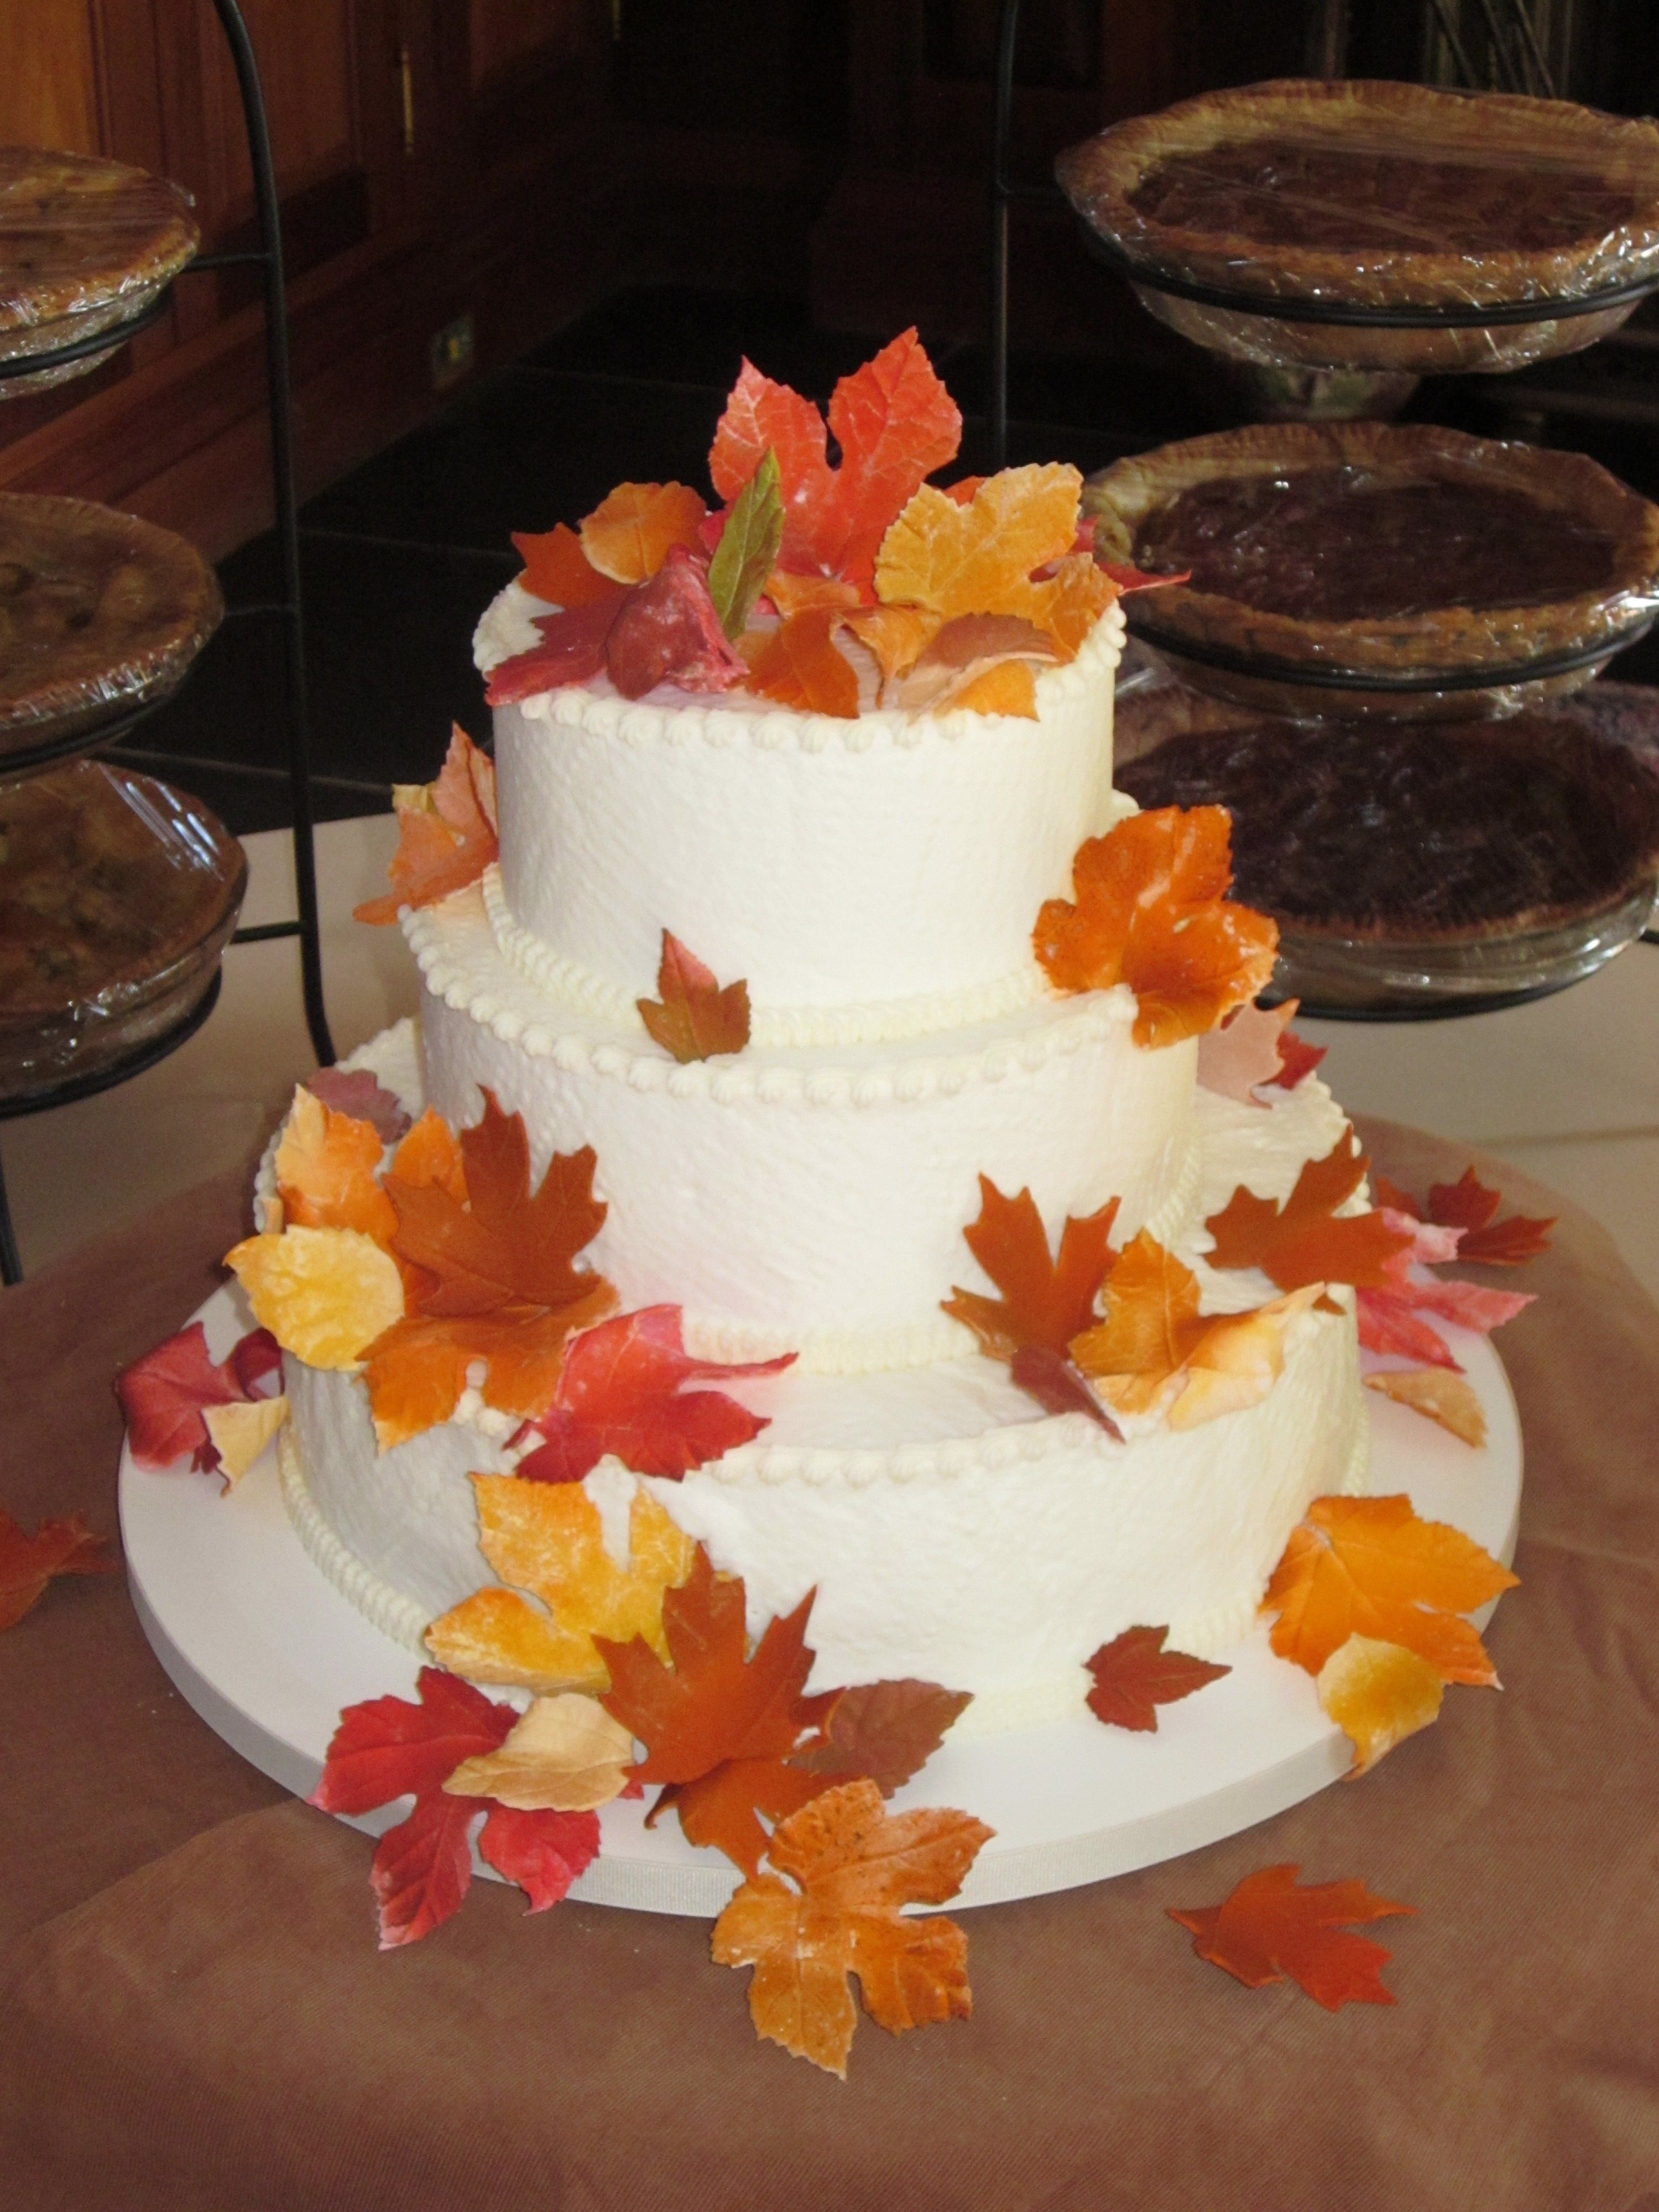 Fall Wedding Cakes With Leaves
 Fondant fall leaves adorn this simple wedding cake in